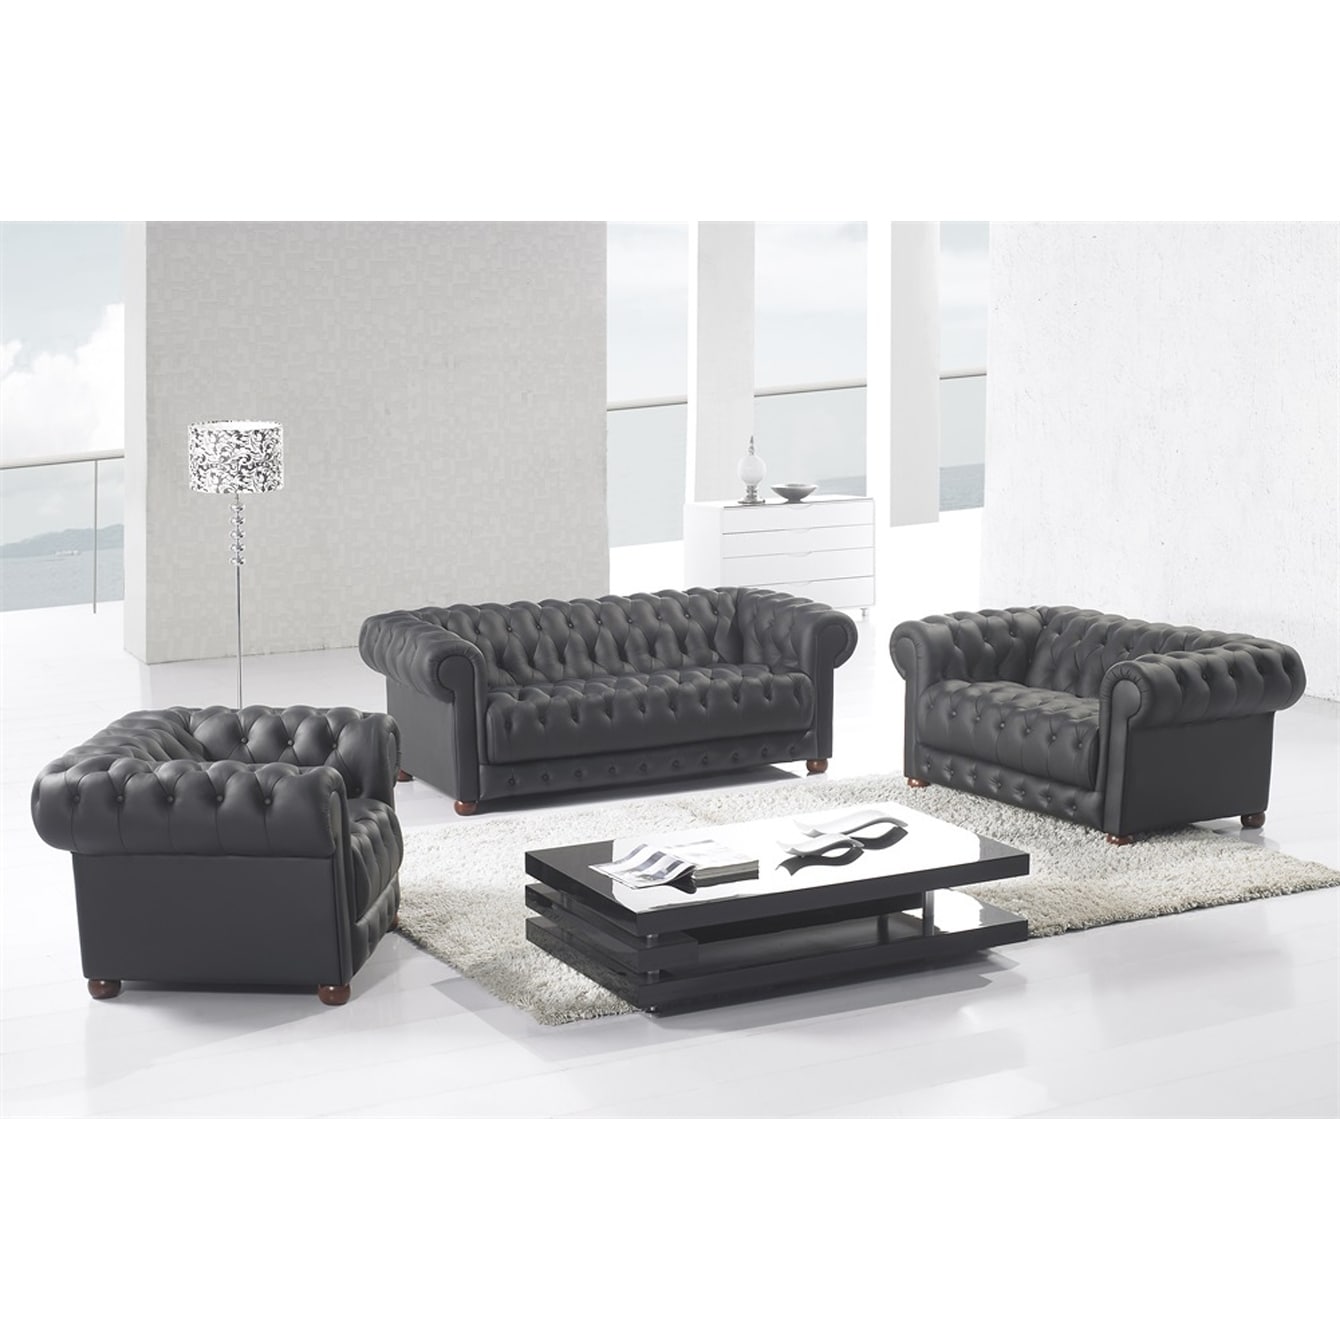 Matte Black Modern Contemporary Real Leather Configurable Living Room Furniture Set With Sofa